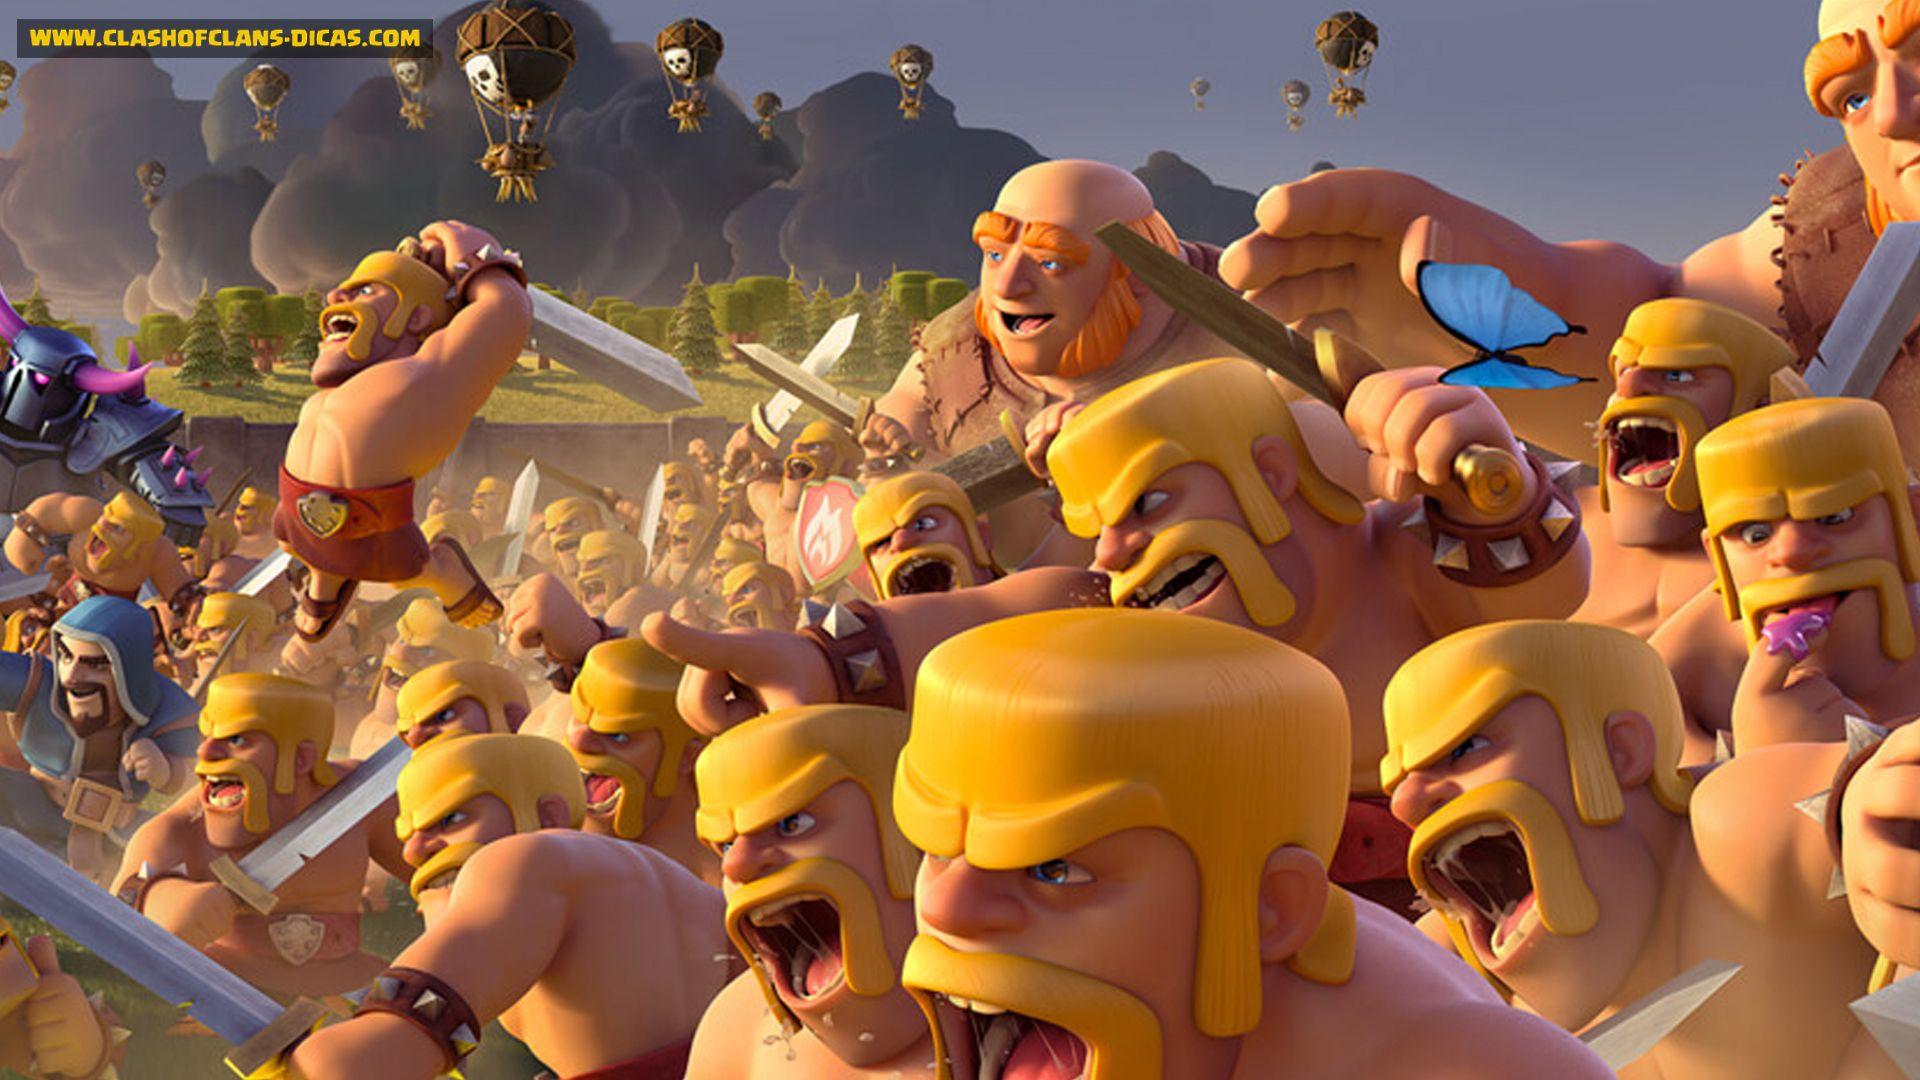 Clash of Clans Wallpaper clashwiki Image for Clash Of Clans